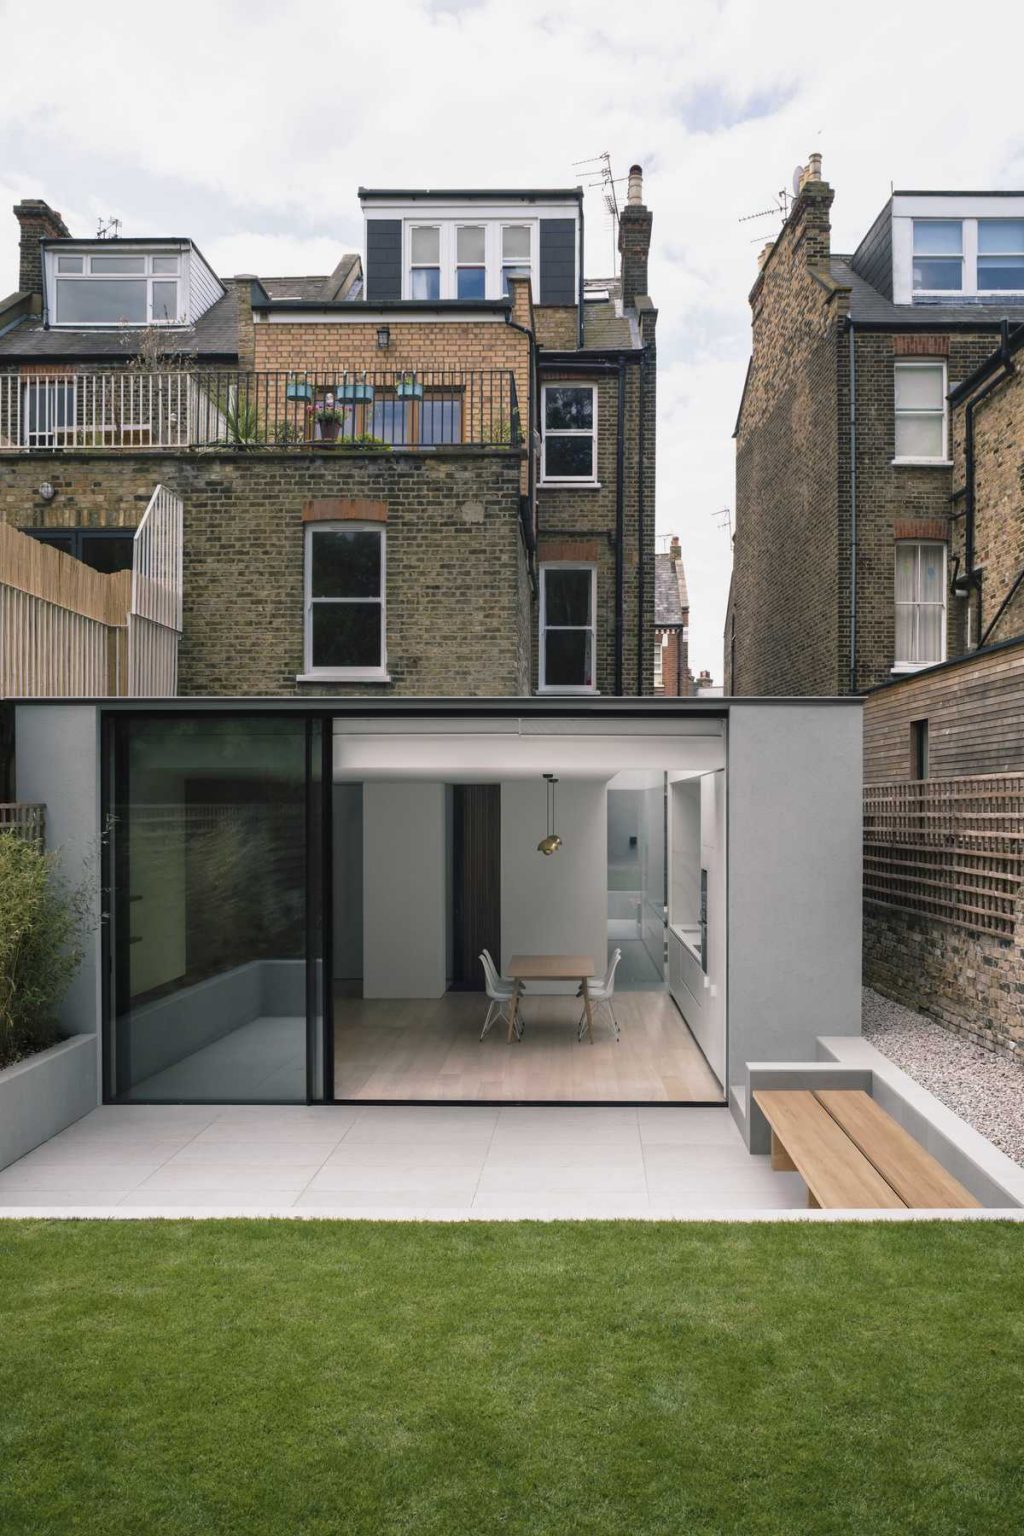 Extension of a single-storey garden flat by Alexander Martin Architects